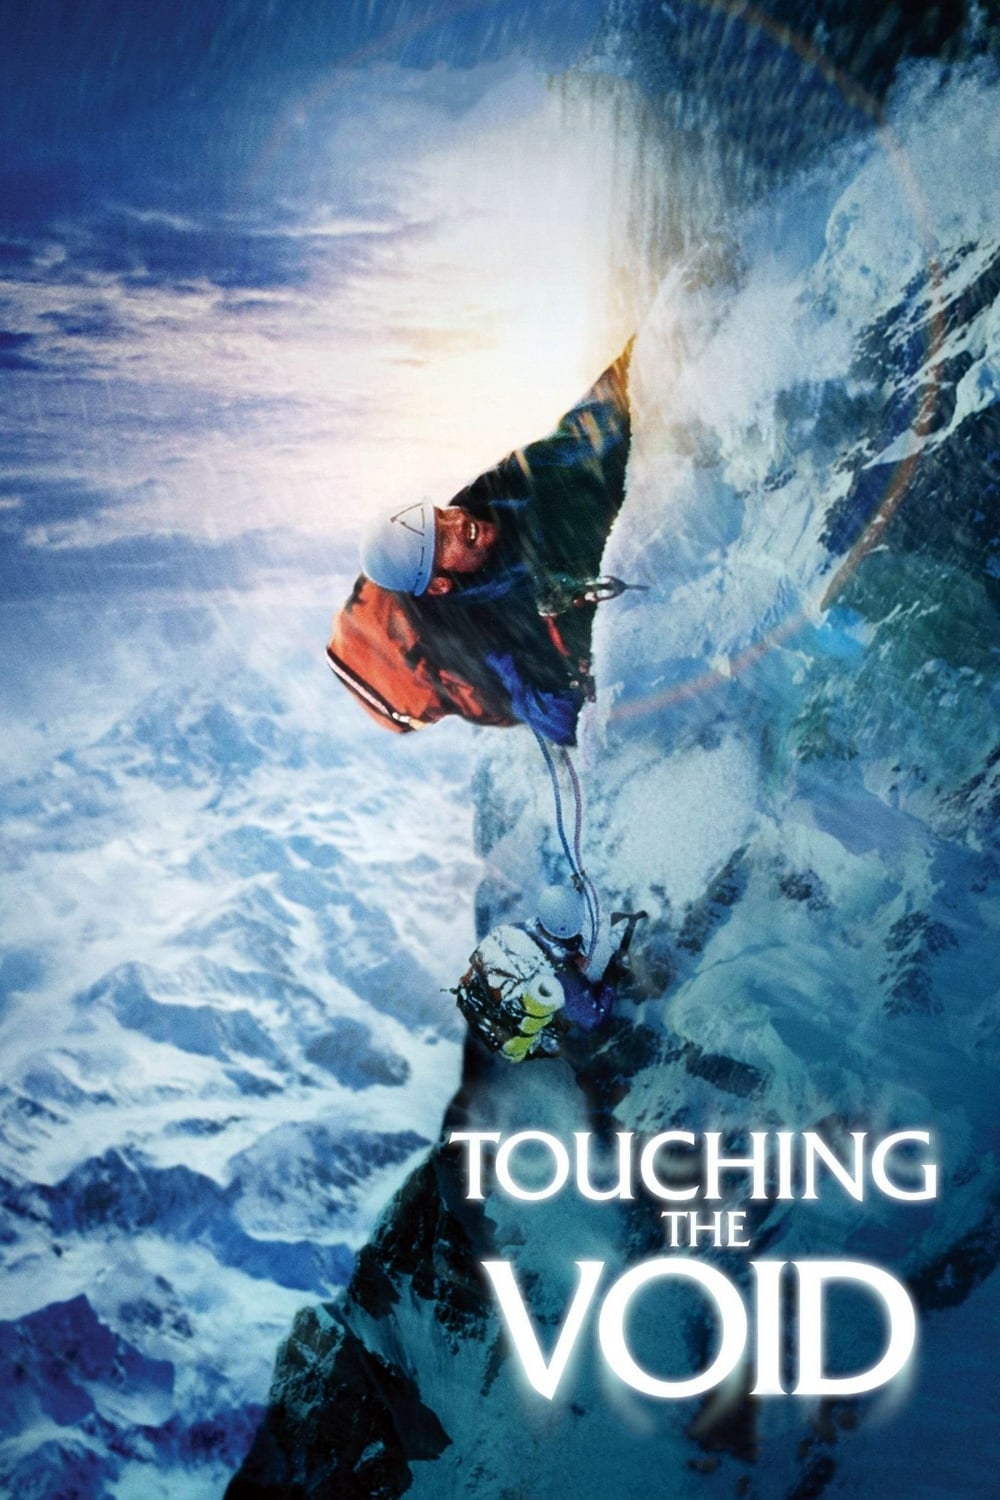 [Movie] Touching the Void